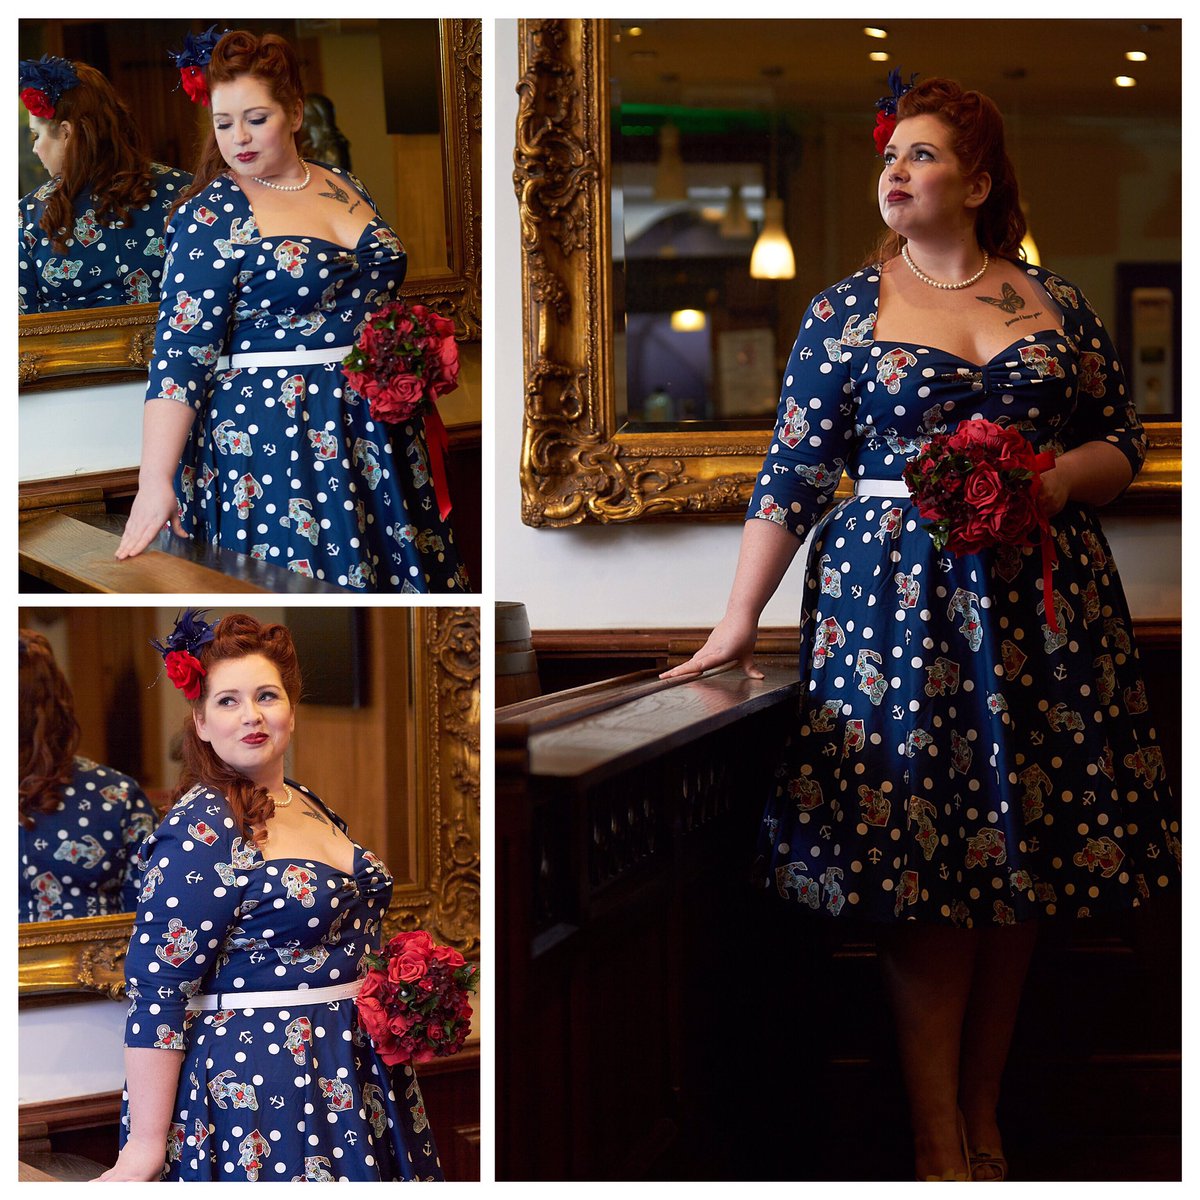 Loved styling @Musicallymade16 hair and makeup from our recent shoot with @BohemianFinds and @fotopositief ❤️✨

#vintage #vintagestyling #photoshoot #vintagehair #pinup #swingdress #50sfashion #specialoccasion #styling #northampton #thepowderpuffparlour